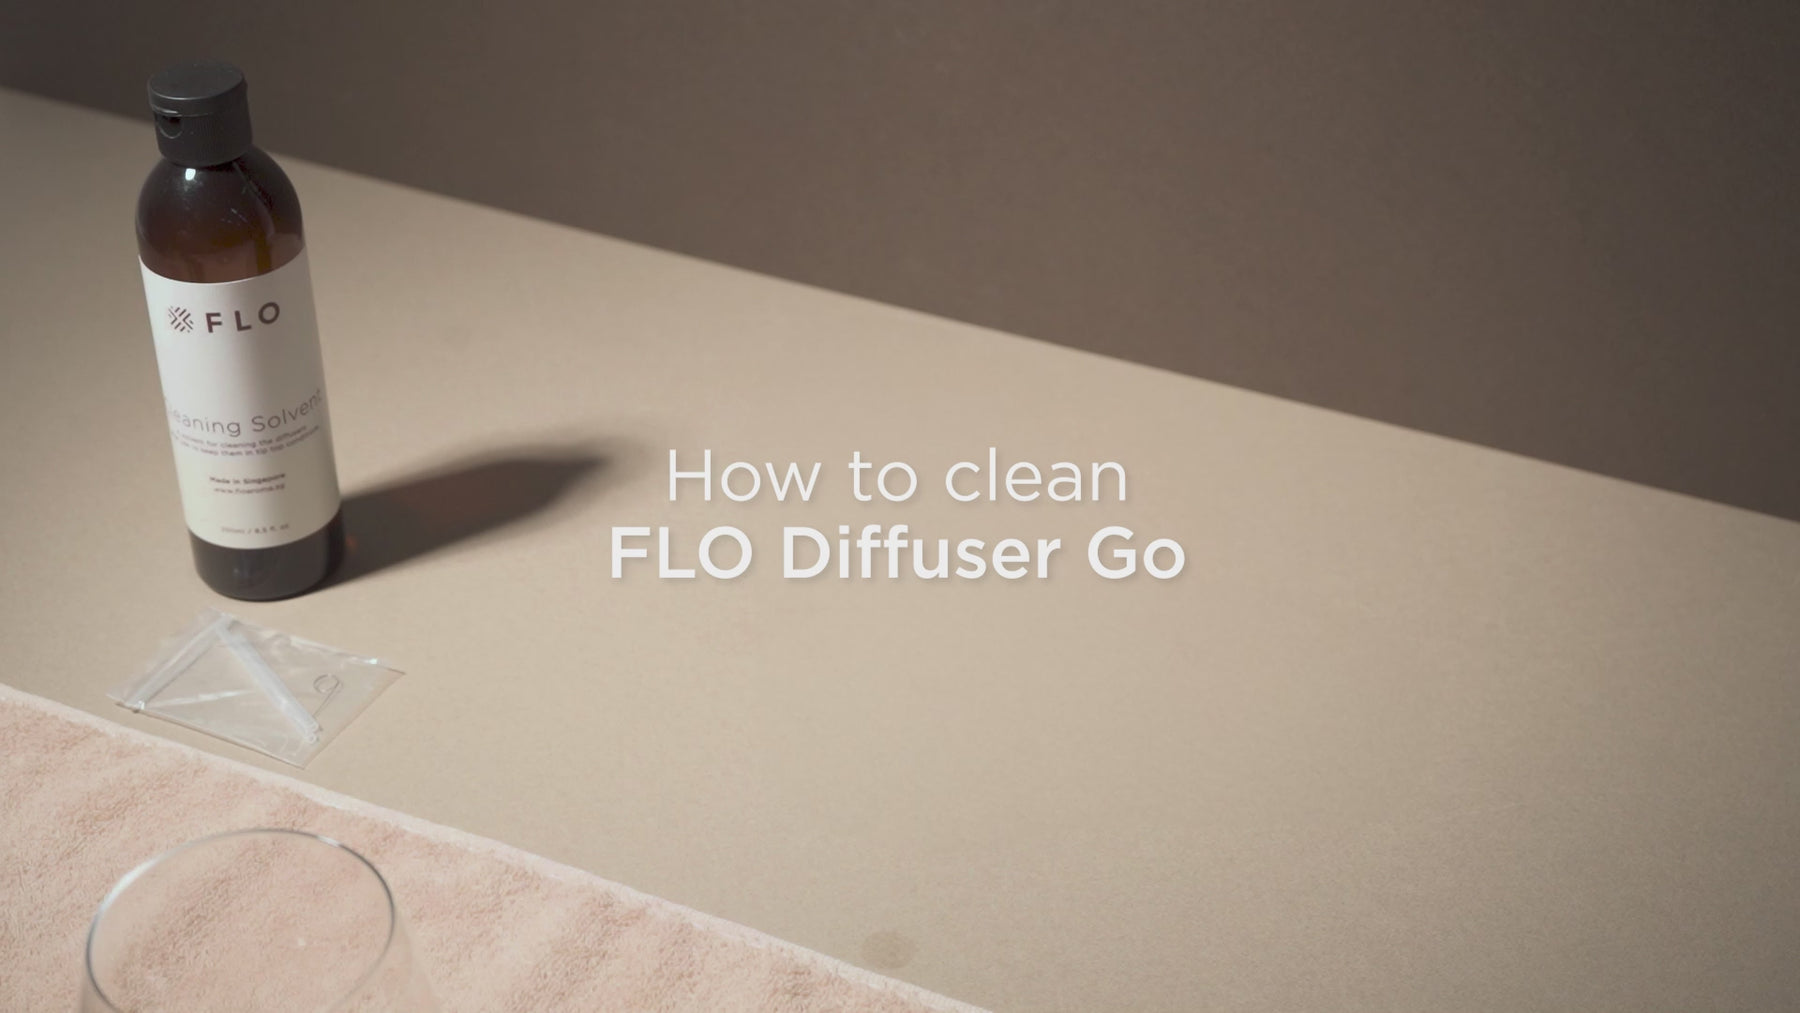 How to clean the FLO Diffuser Go.